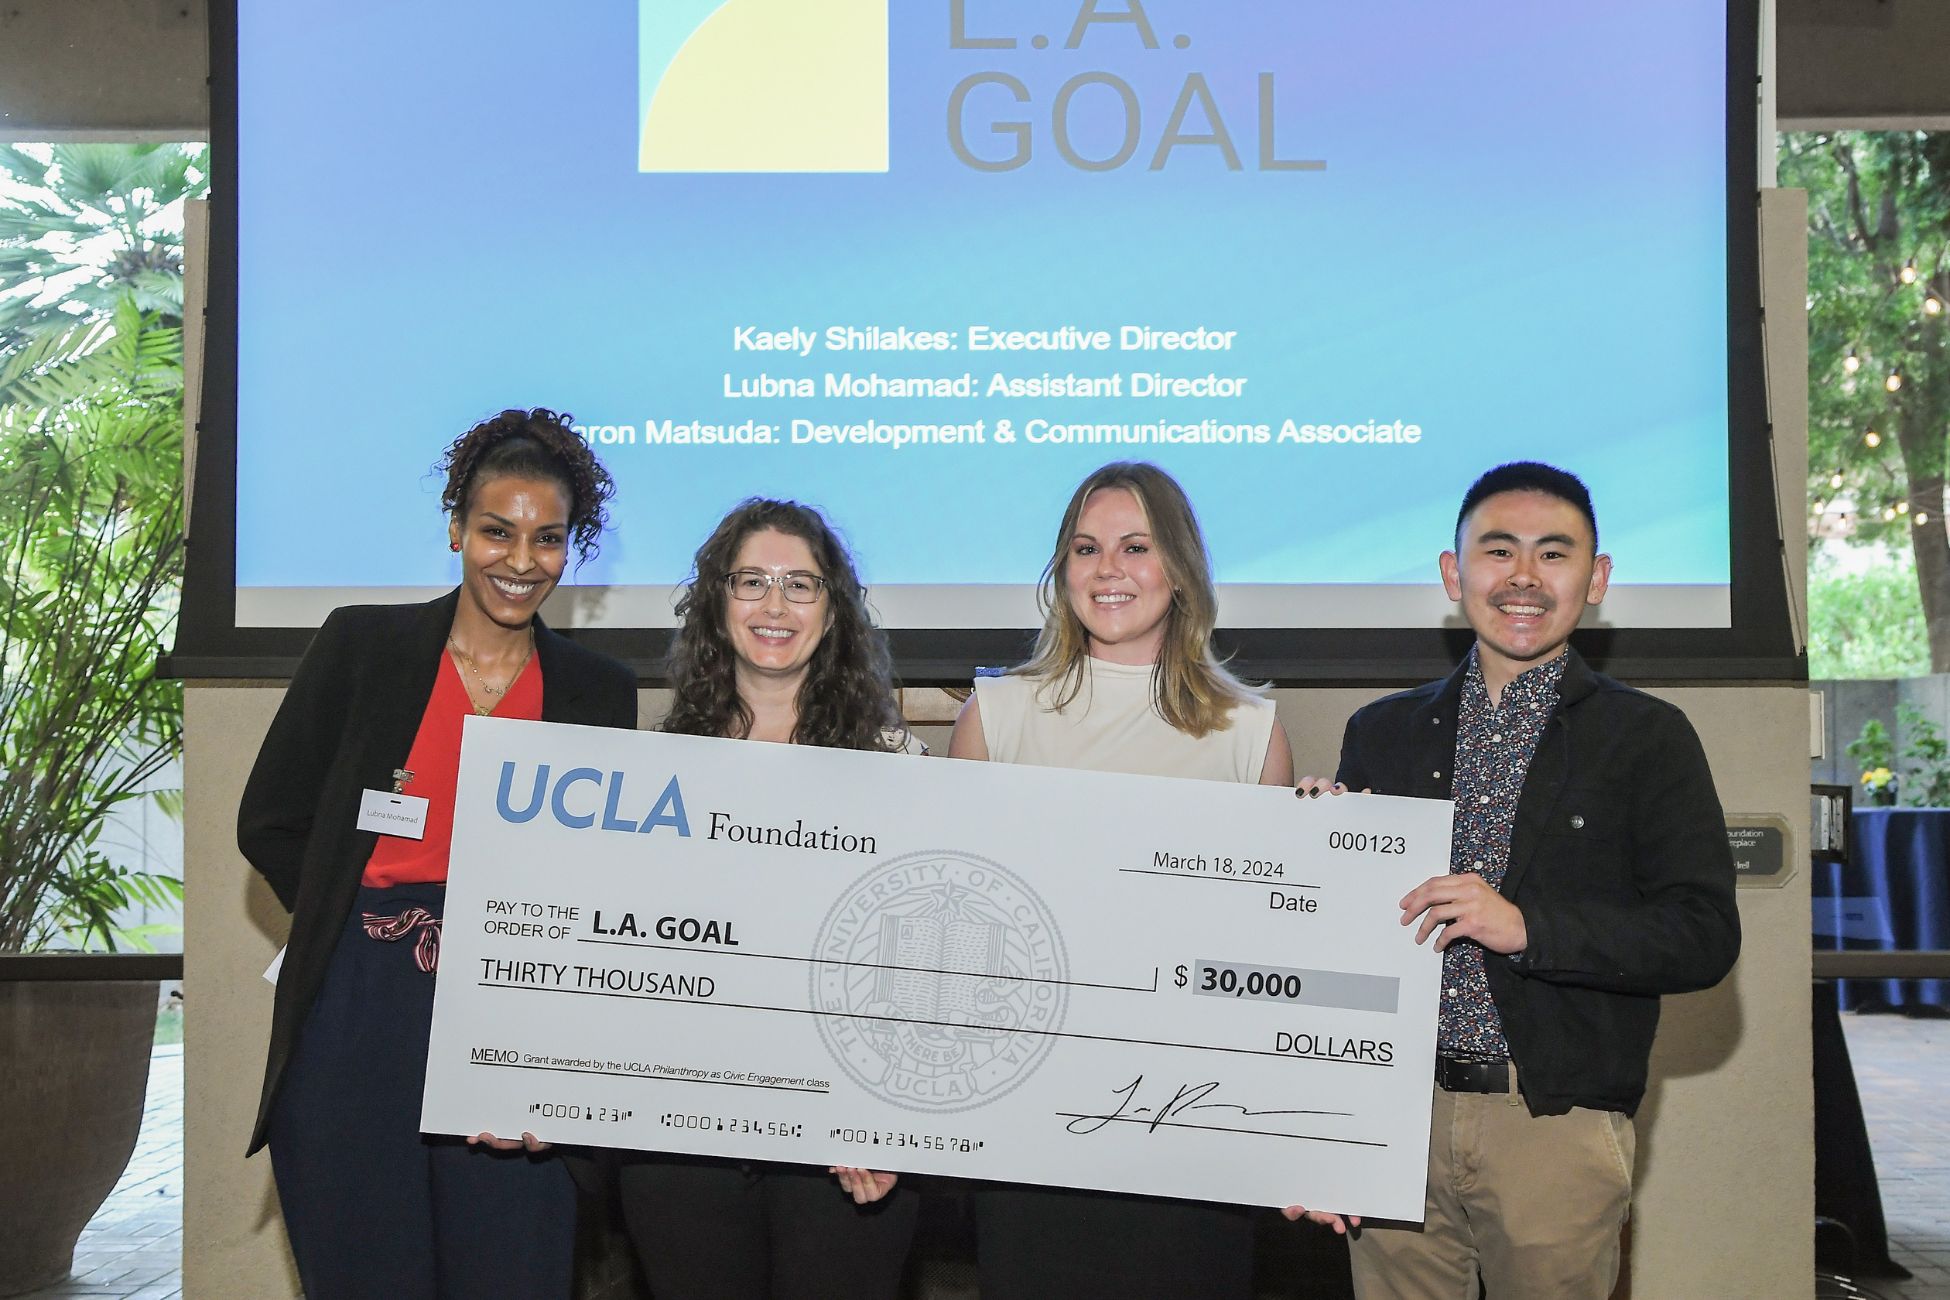 Four people of varying ethnicities hold a large check and smile at the camera.